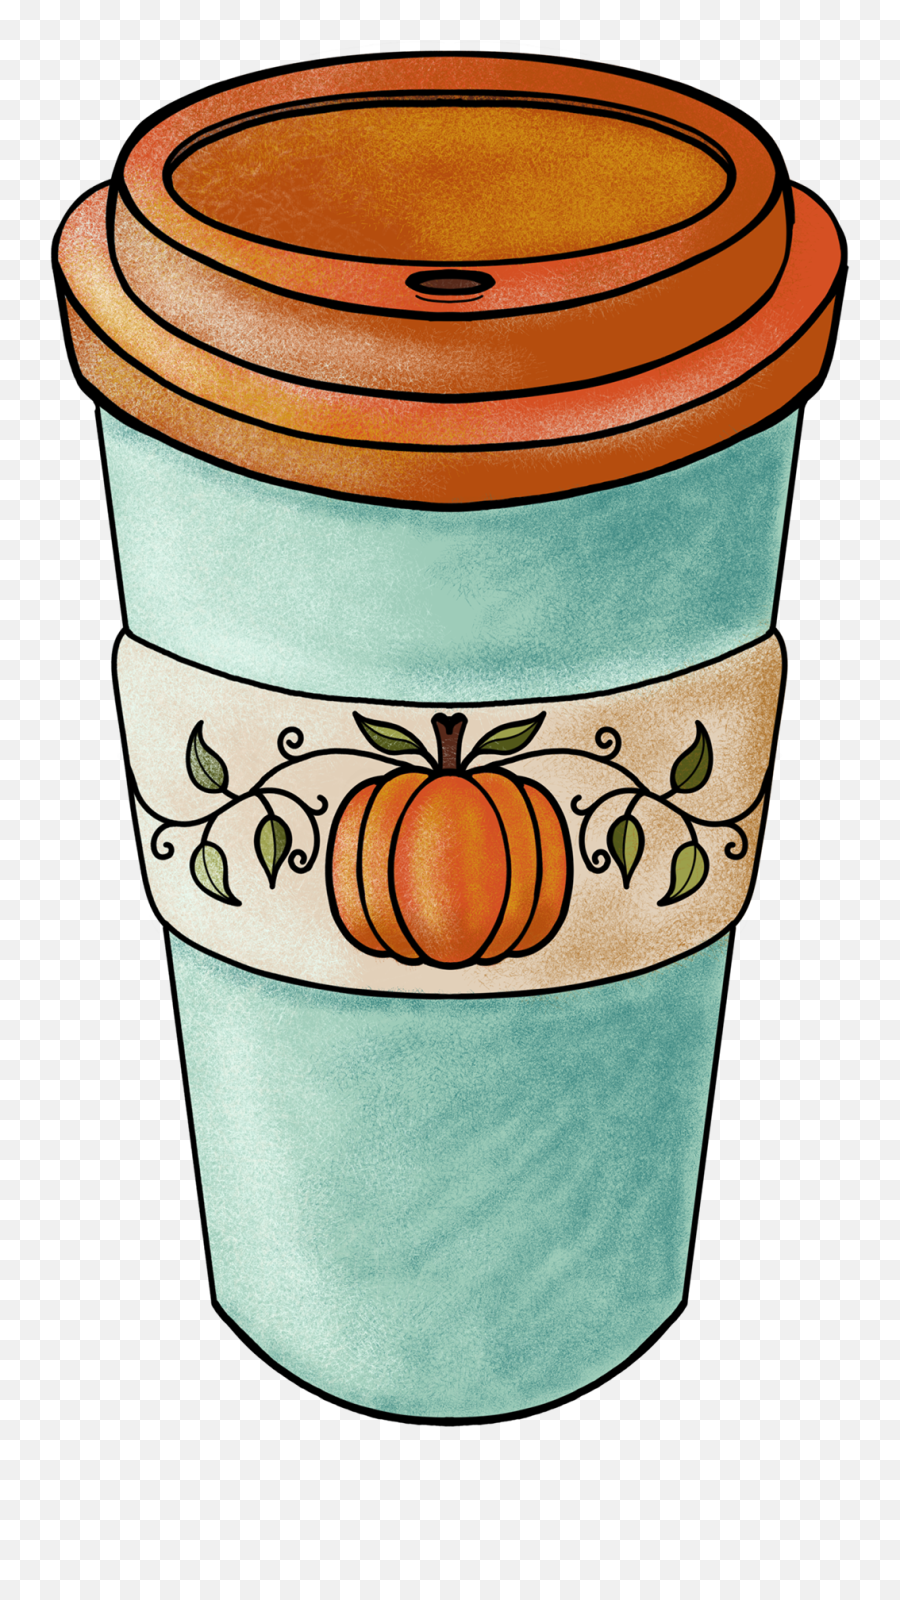 Download Hd Aimie Clouse - Fall Pumpkin Spice Clipart Pumpkin Spice Latte Clipart Png,Pumpkin Spice Png